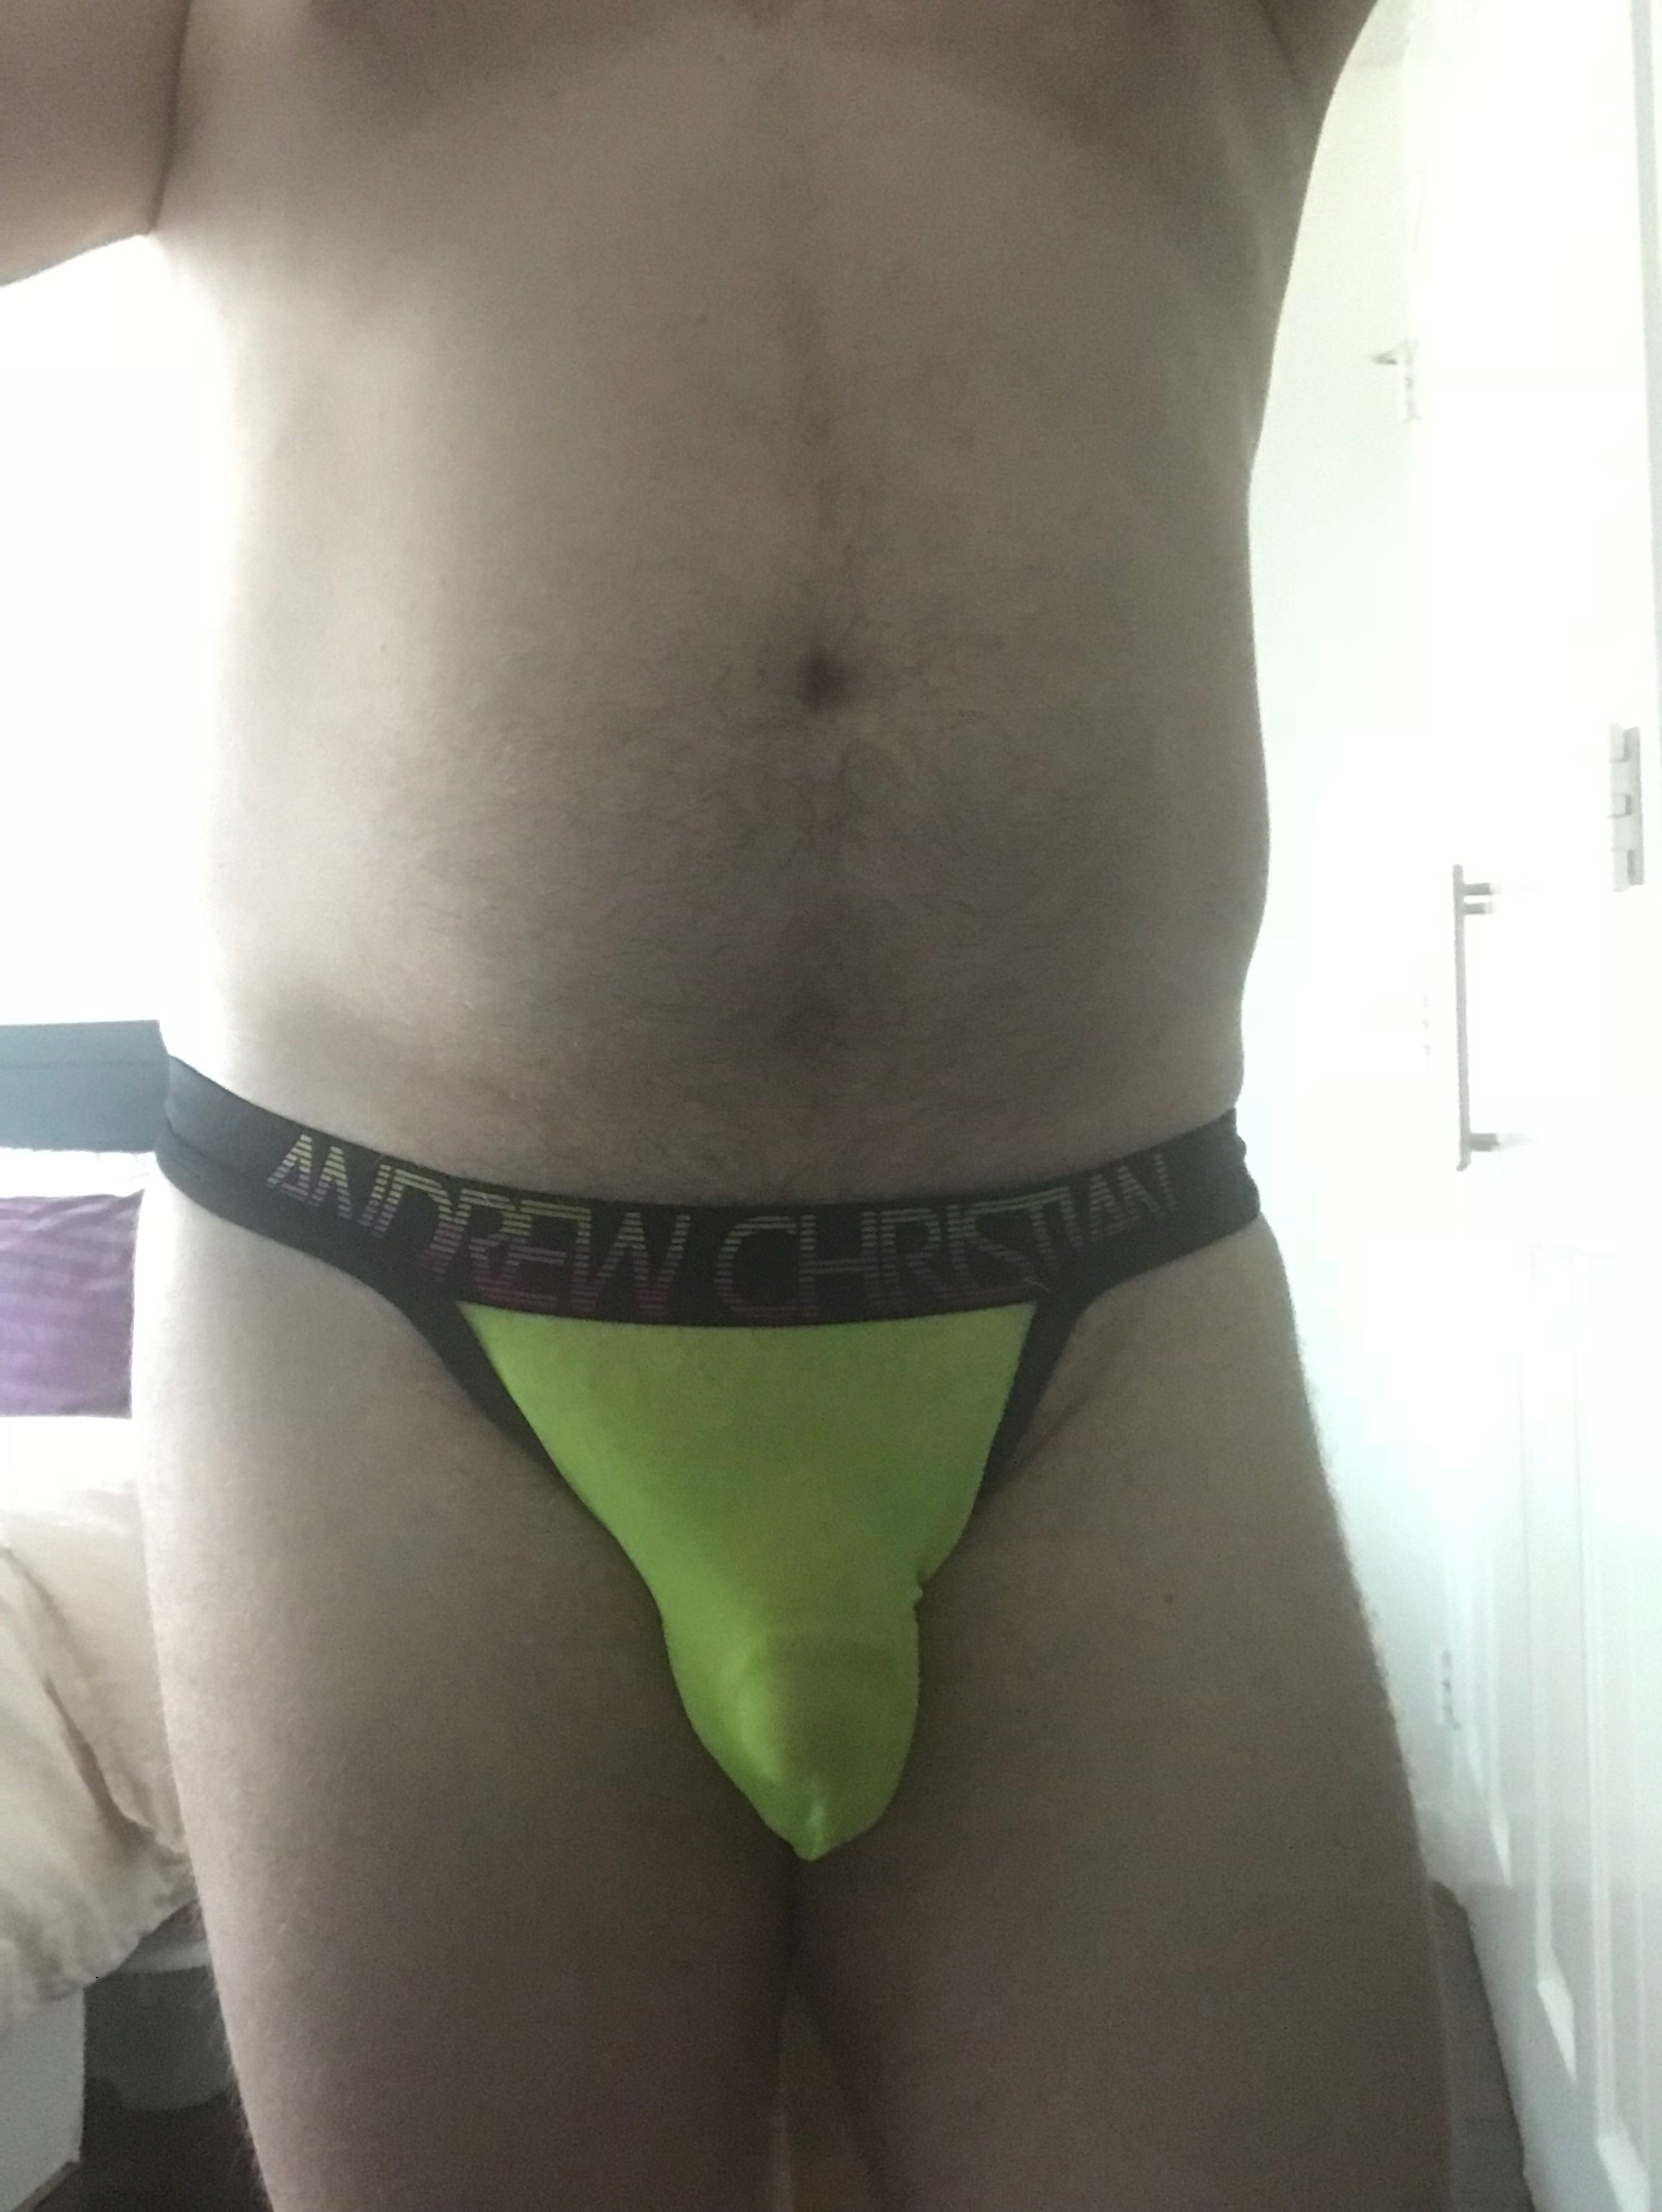 Mesh thong today for another thursday…